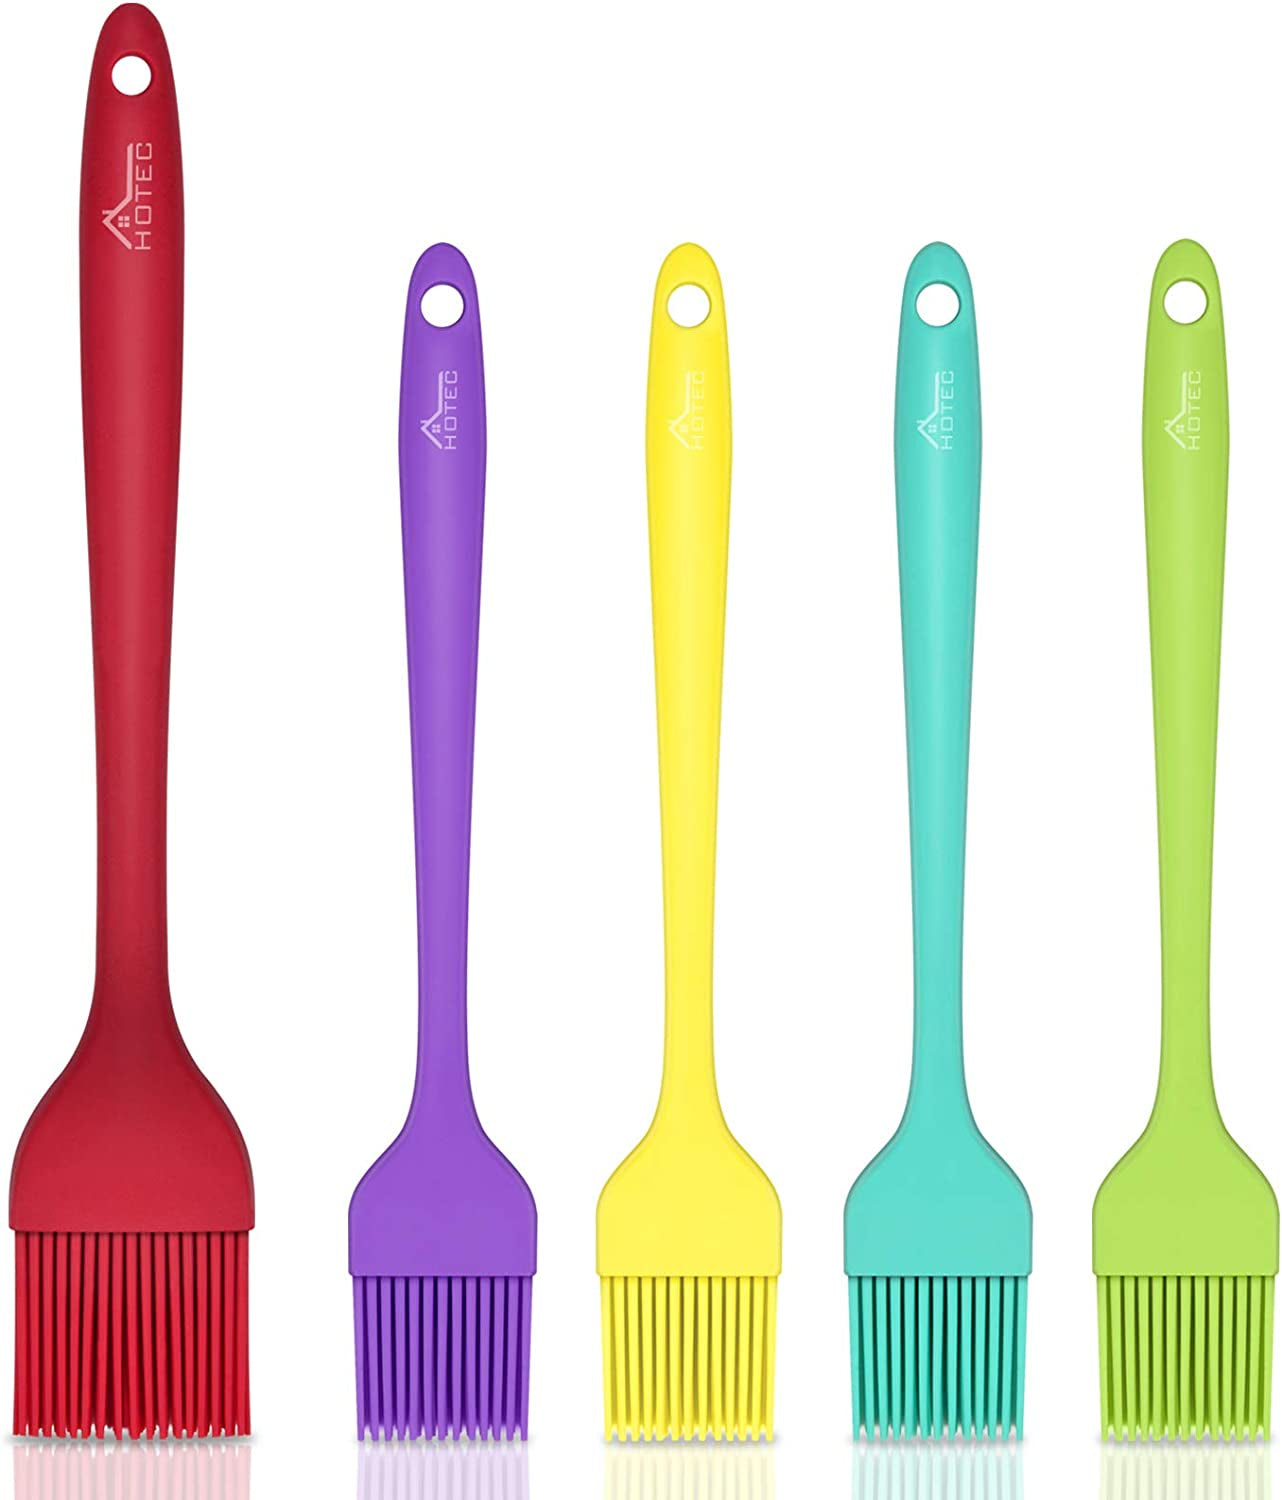 Silicone Heat Resistant Marinading Meat Grill Basting Pastry Brush for Oil Butter Sauce Sausages Desserts Turkey Baster Grill Barbecue, Multicolor